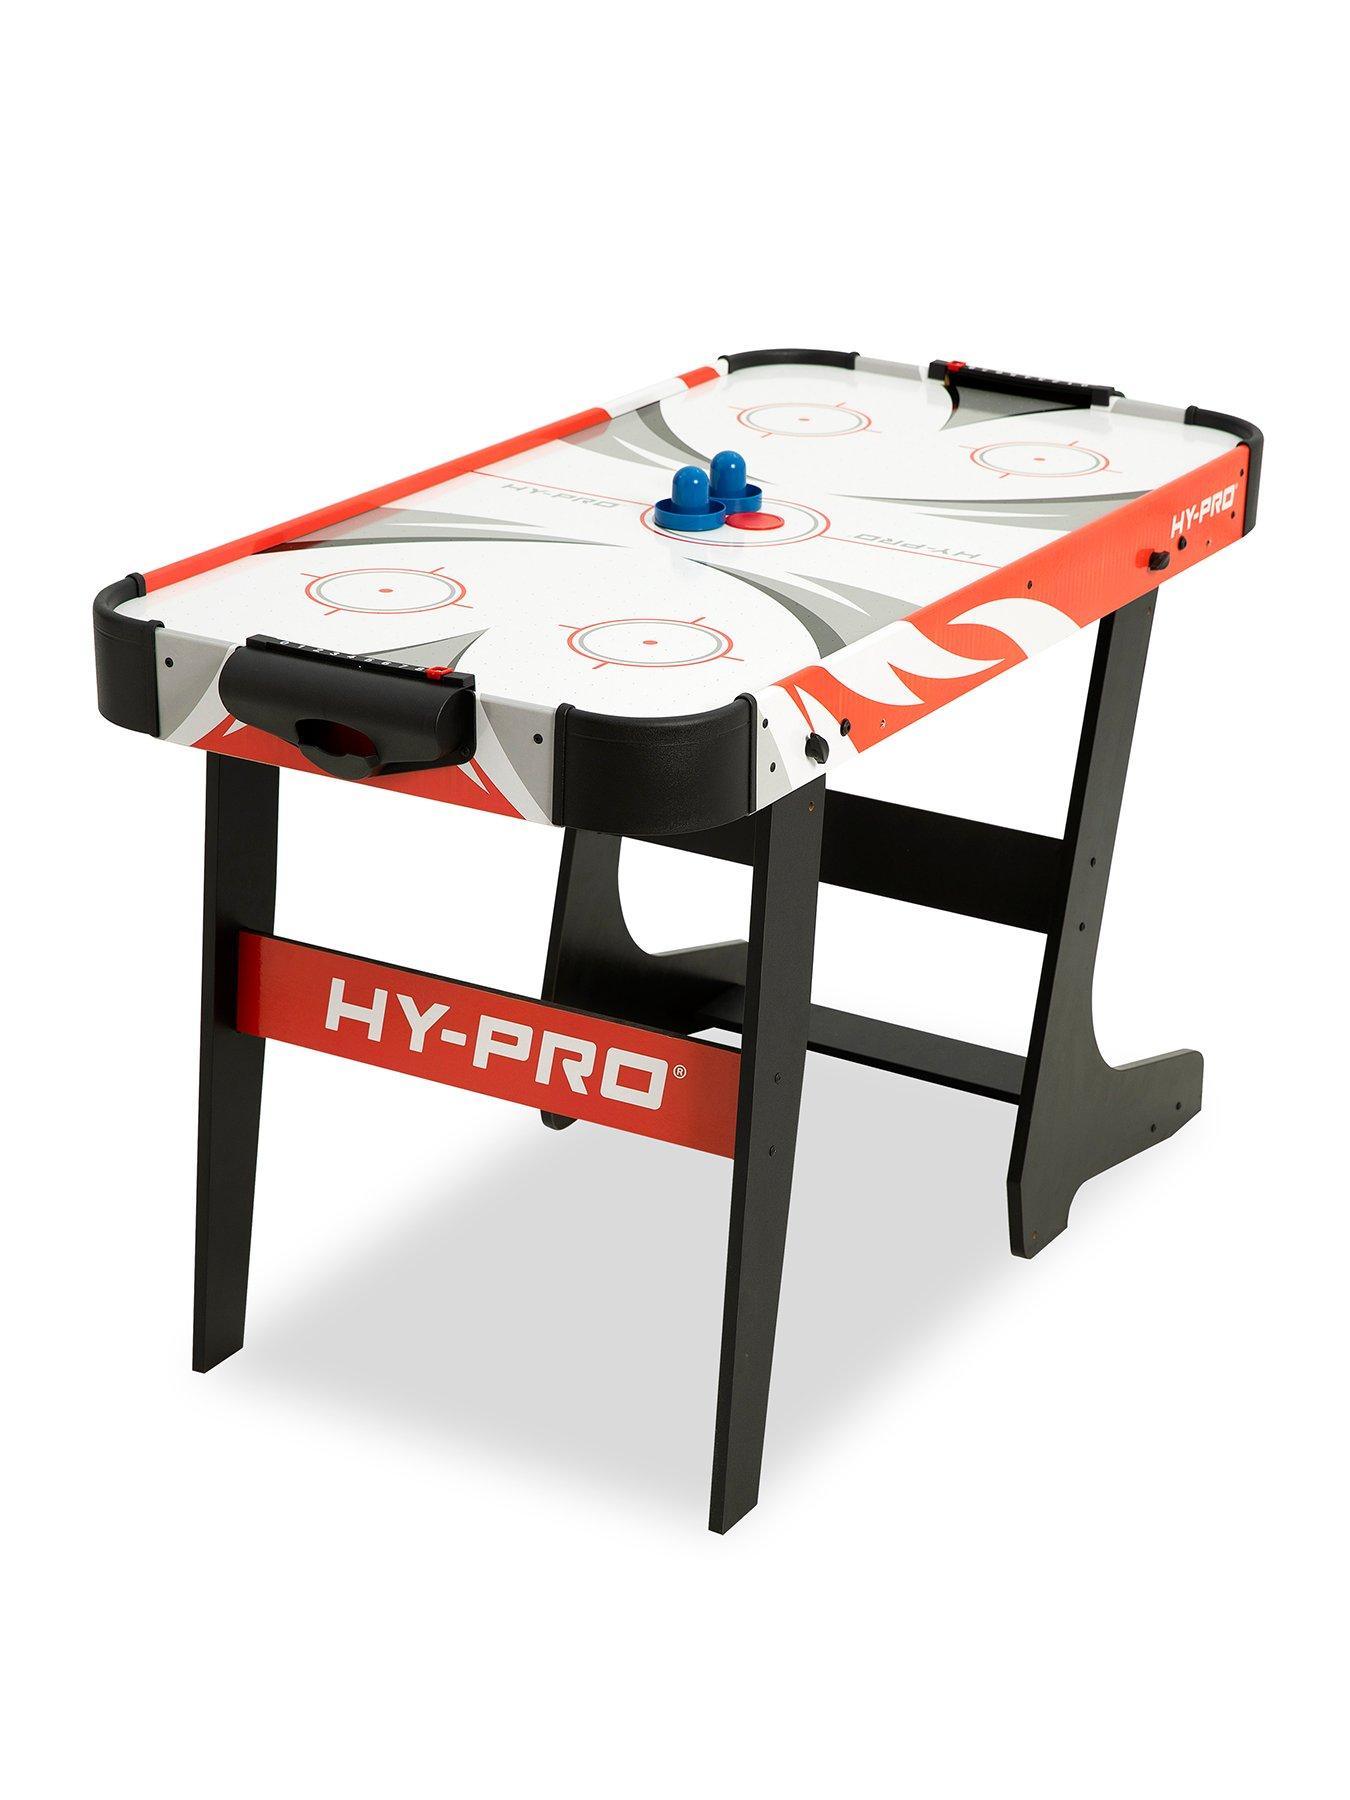 AirZone Play 48 Air Hockey Table with LED Scoring